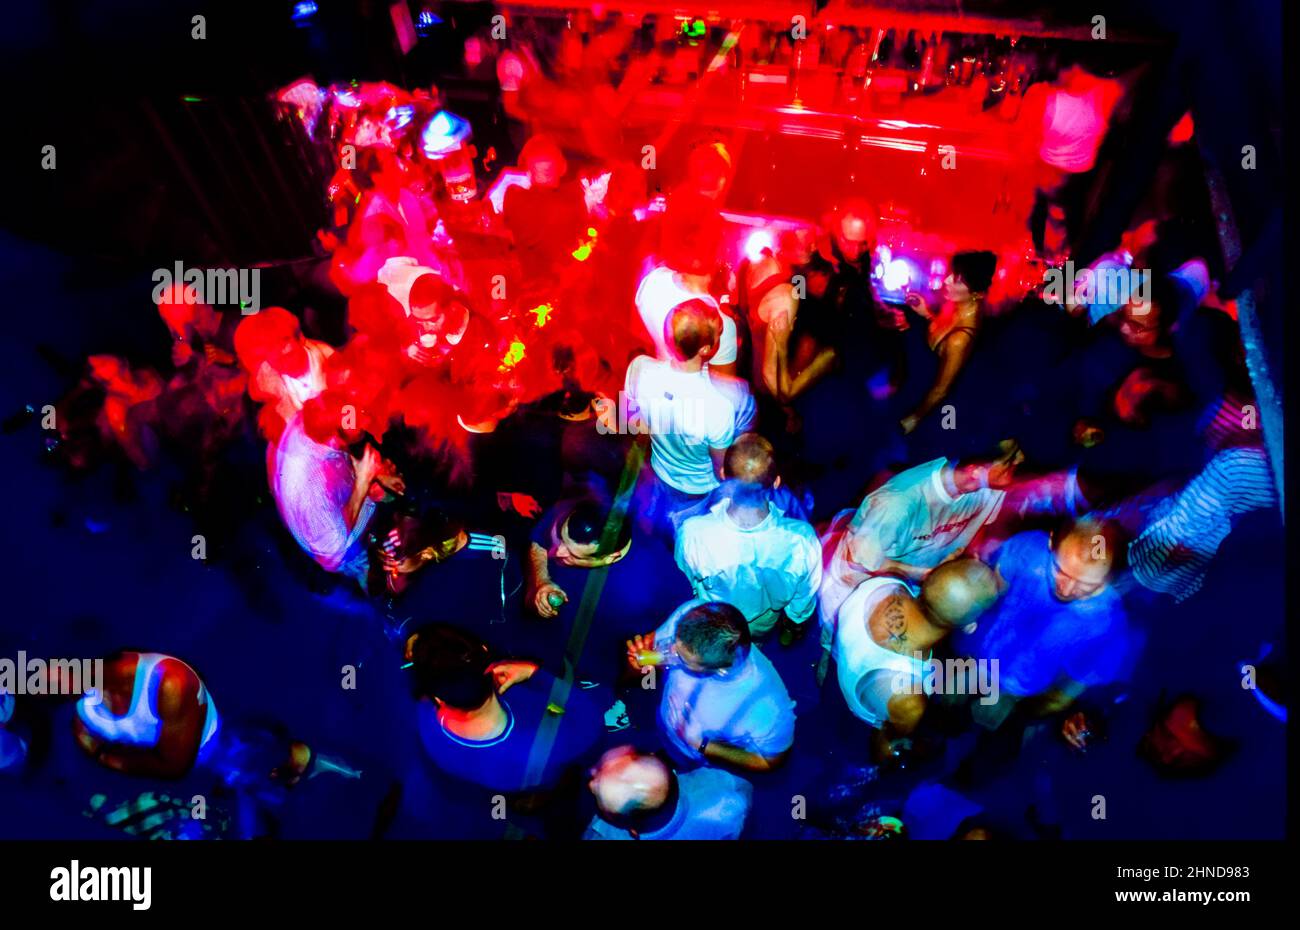 Paris, France, Crowd Dancing in Nightclub with Laser Light Effects Stock Photo